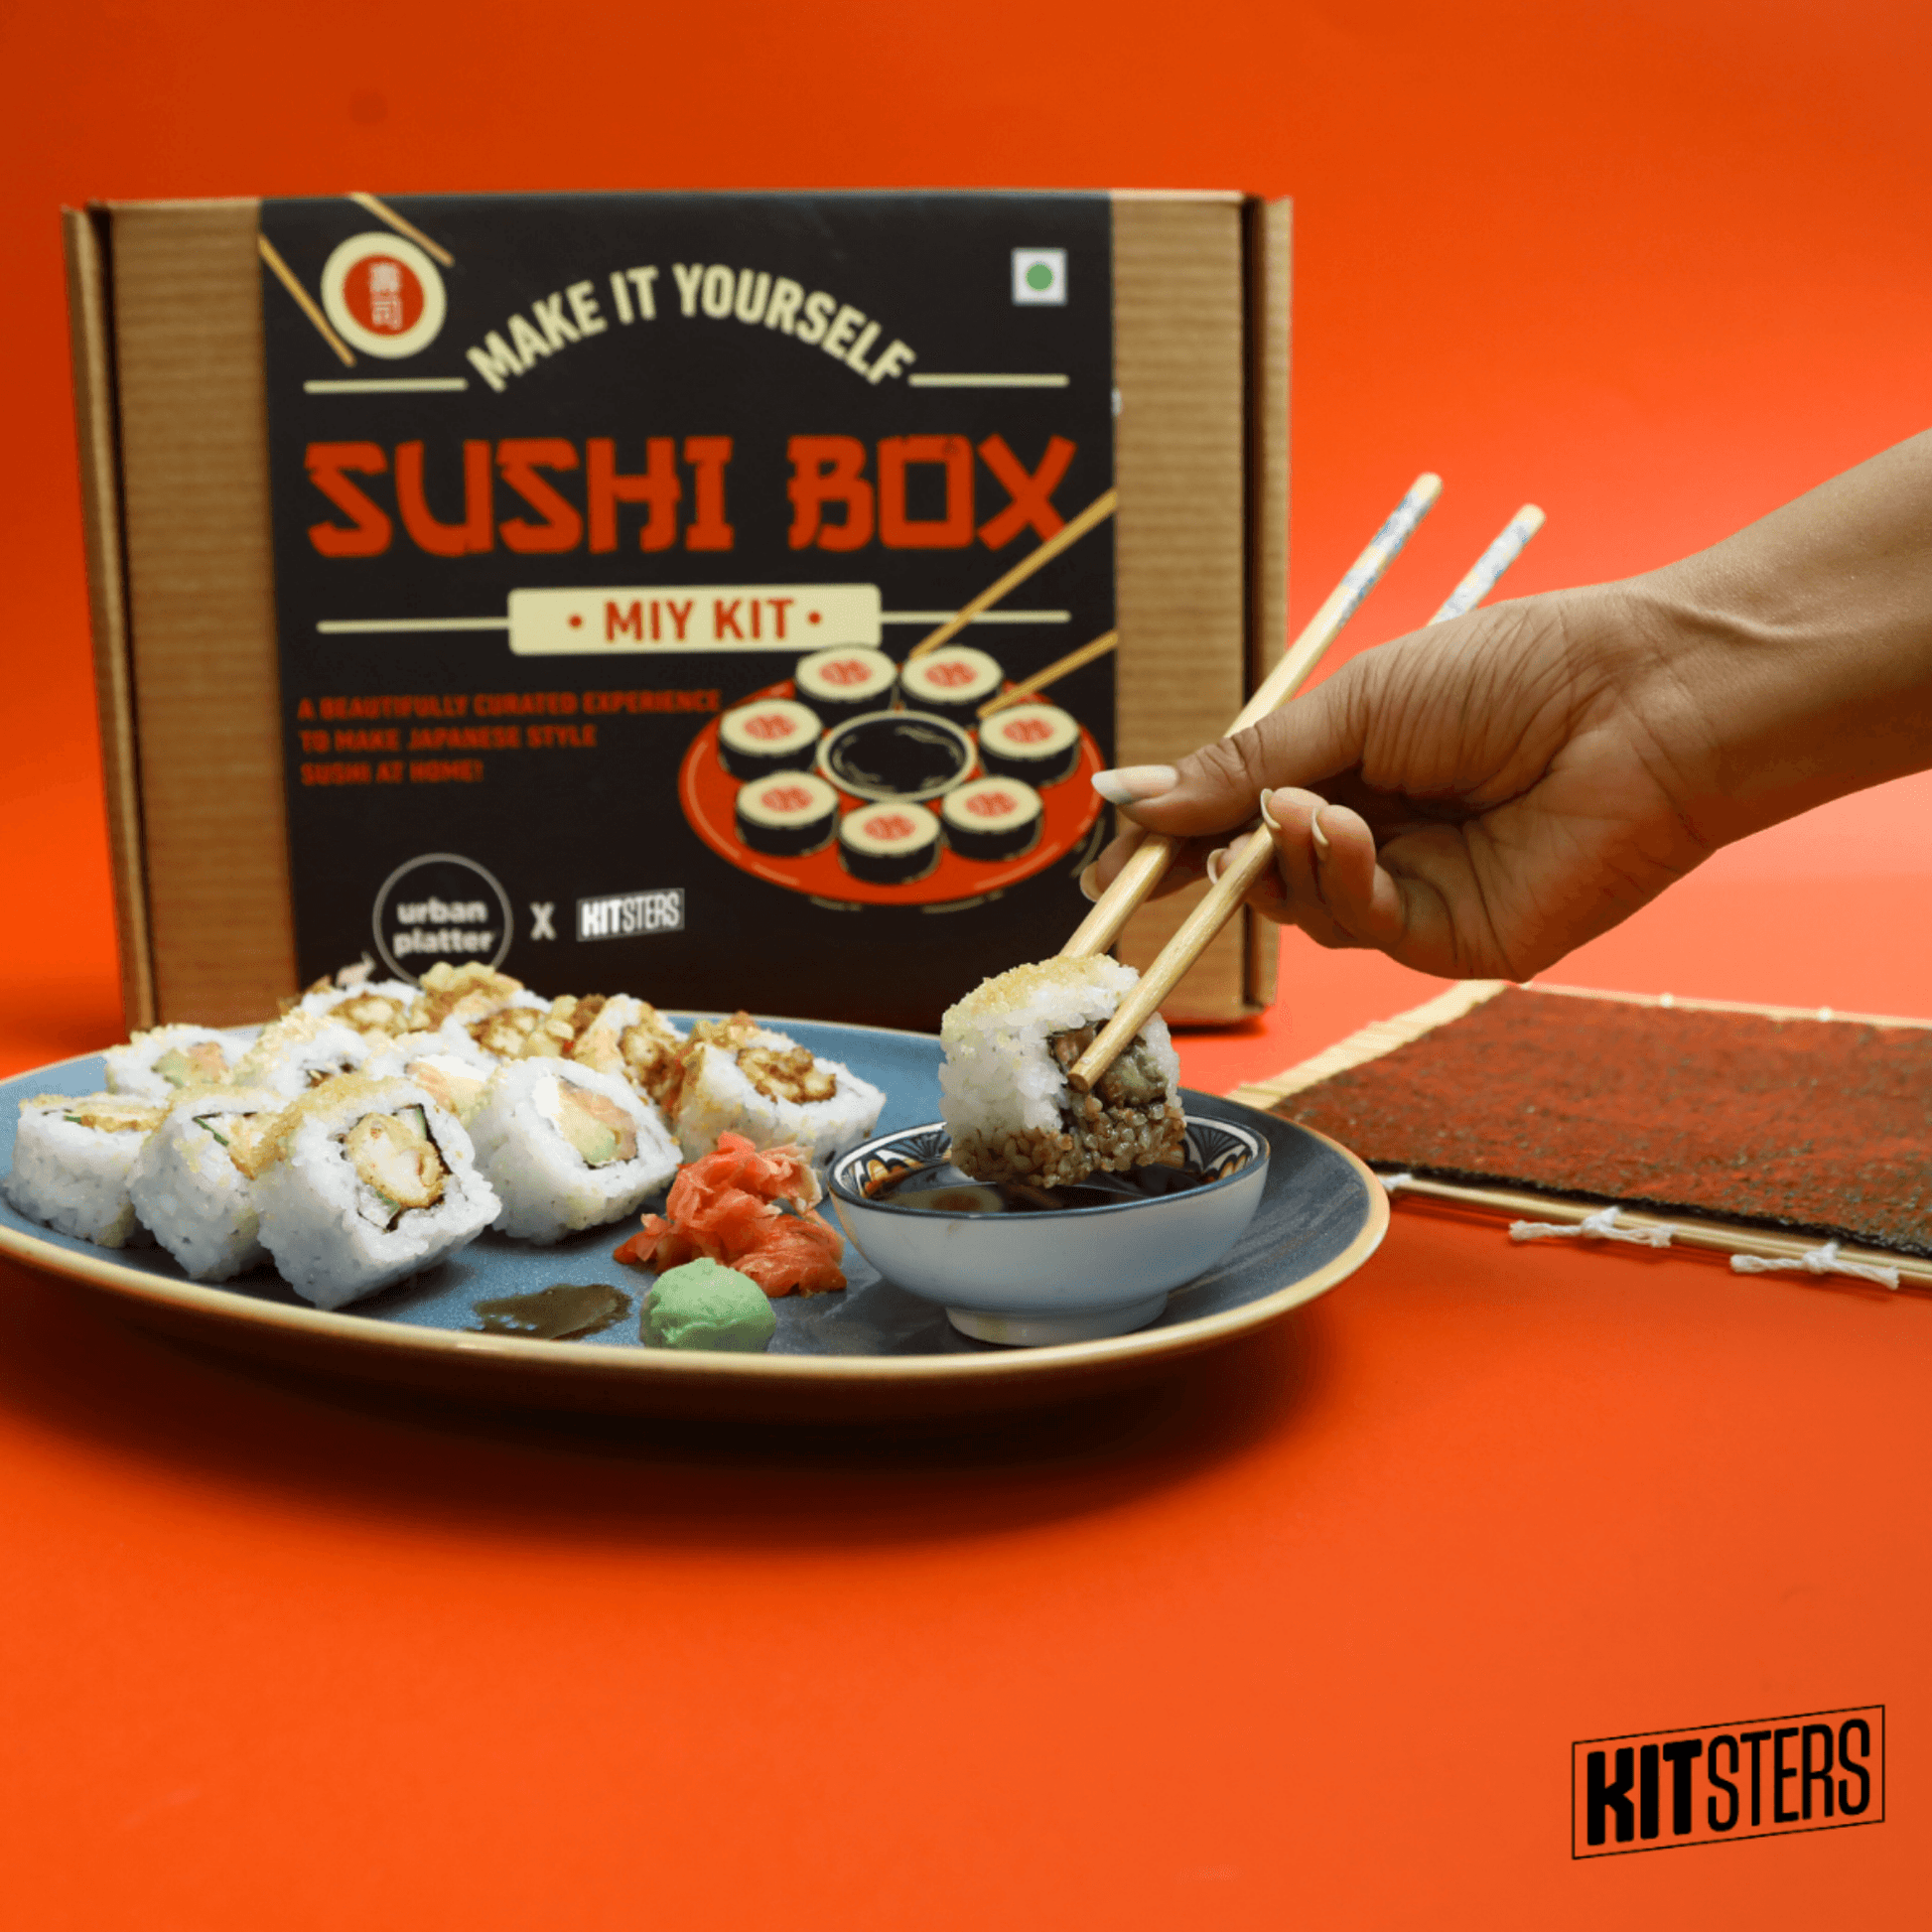 DIY Sushi at Home with a How-to Video